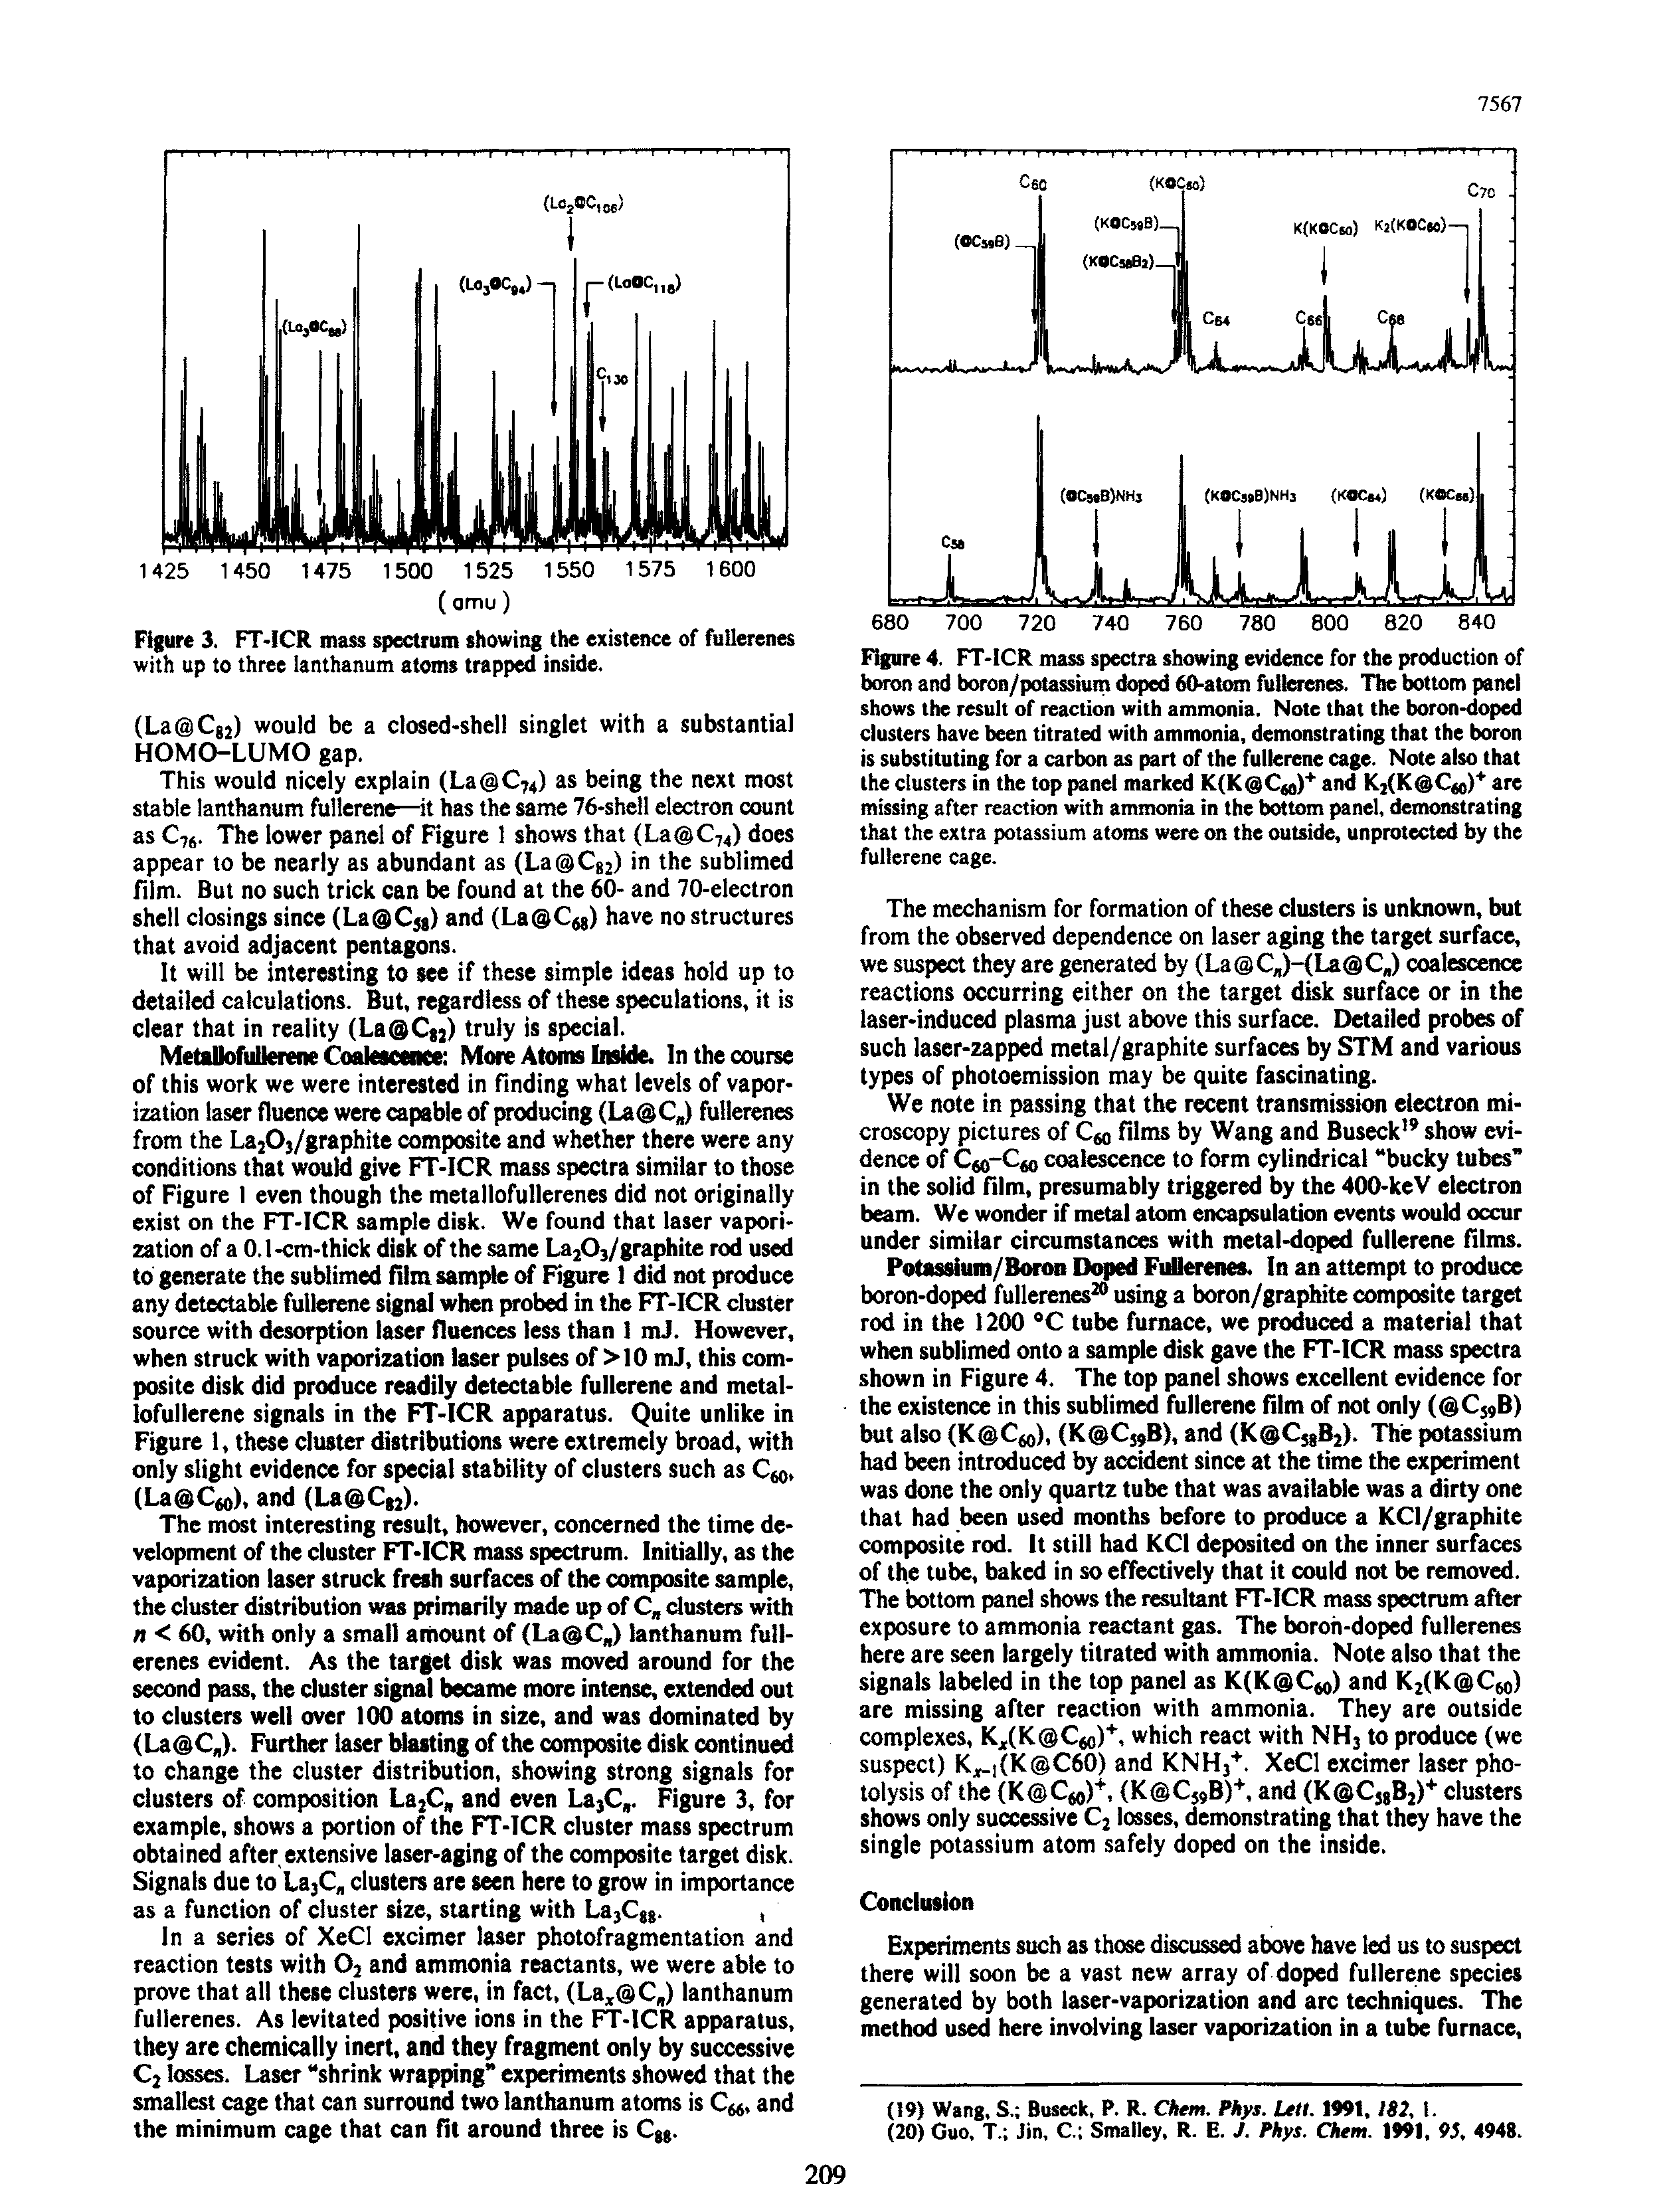 Figure 4. FT-ICR mass spectra showing evidence for the production of boron and boron/potassium doped 60-ati n fuiloenes. The bottom panel shows the result of reaction with ammonia. Note that the boron-doped clusters have been titrated with ammonia, demonstrating that the boron is substituting for a carbon as part of the fullerene cage. Note also that the clusters in the top panel marked K(K C4o) and K2(K C o) are missing after reaction with ammonia in the bottom panel, demonstrating that the extra potassium atoms were on the outside, unprotected by the fullerene cage.